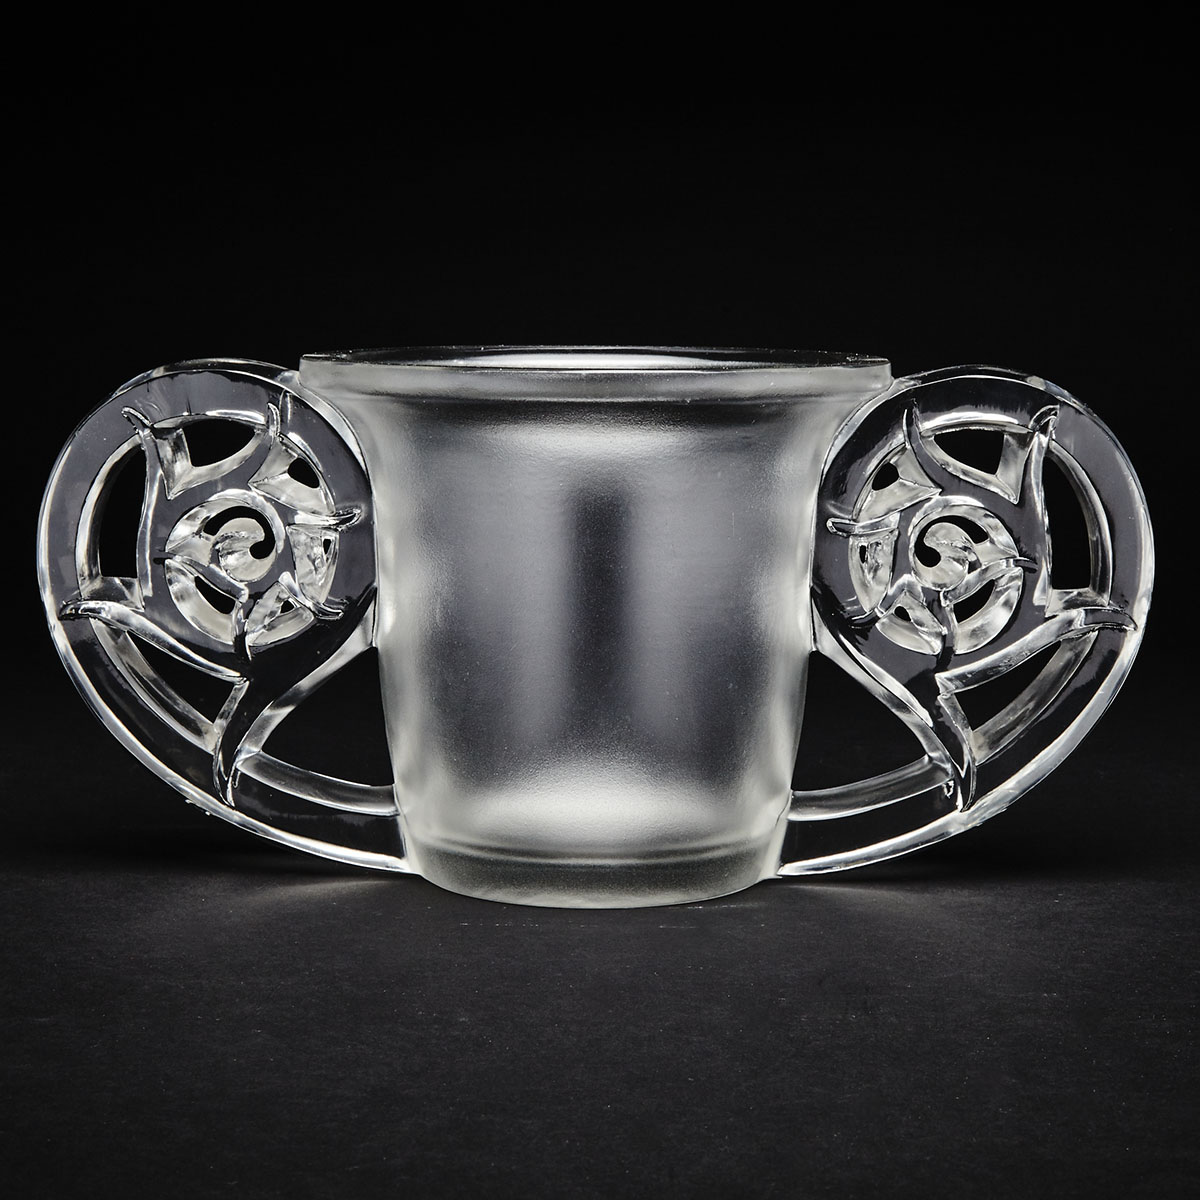 ‘Pierrefonds’, Lalique Moulded and Partly Frosted Glass Vase, c.1930